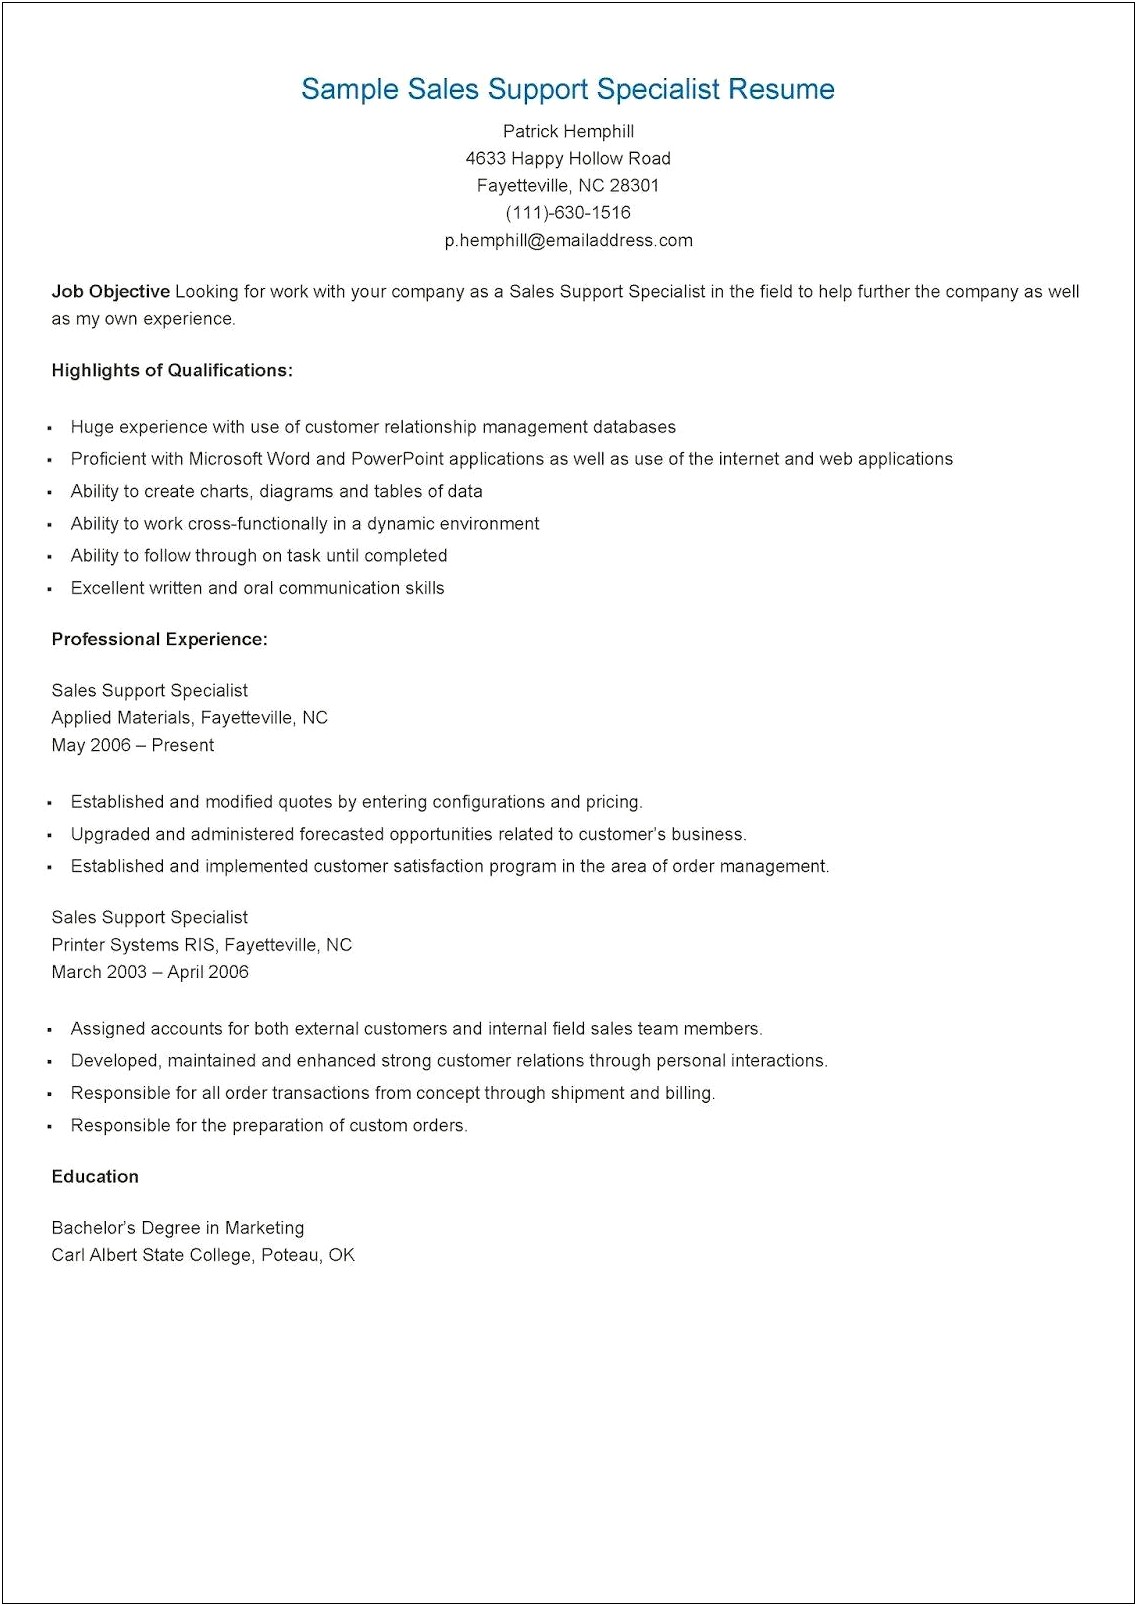 Sample Resume For Sales And Service Specialist